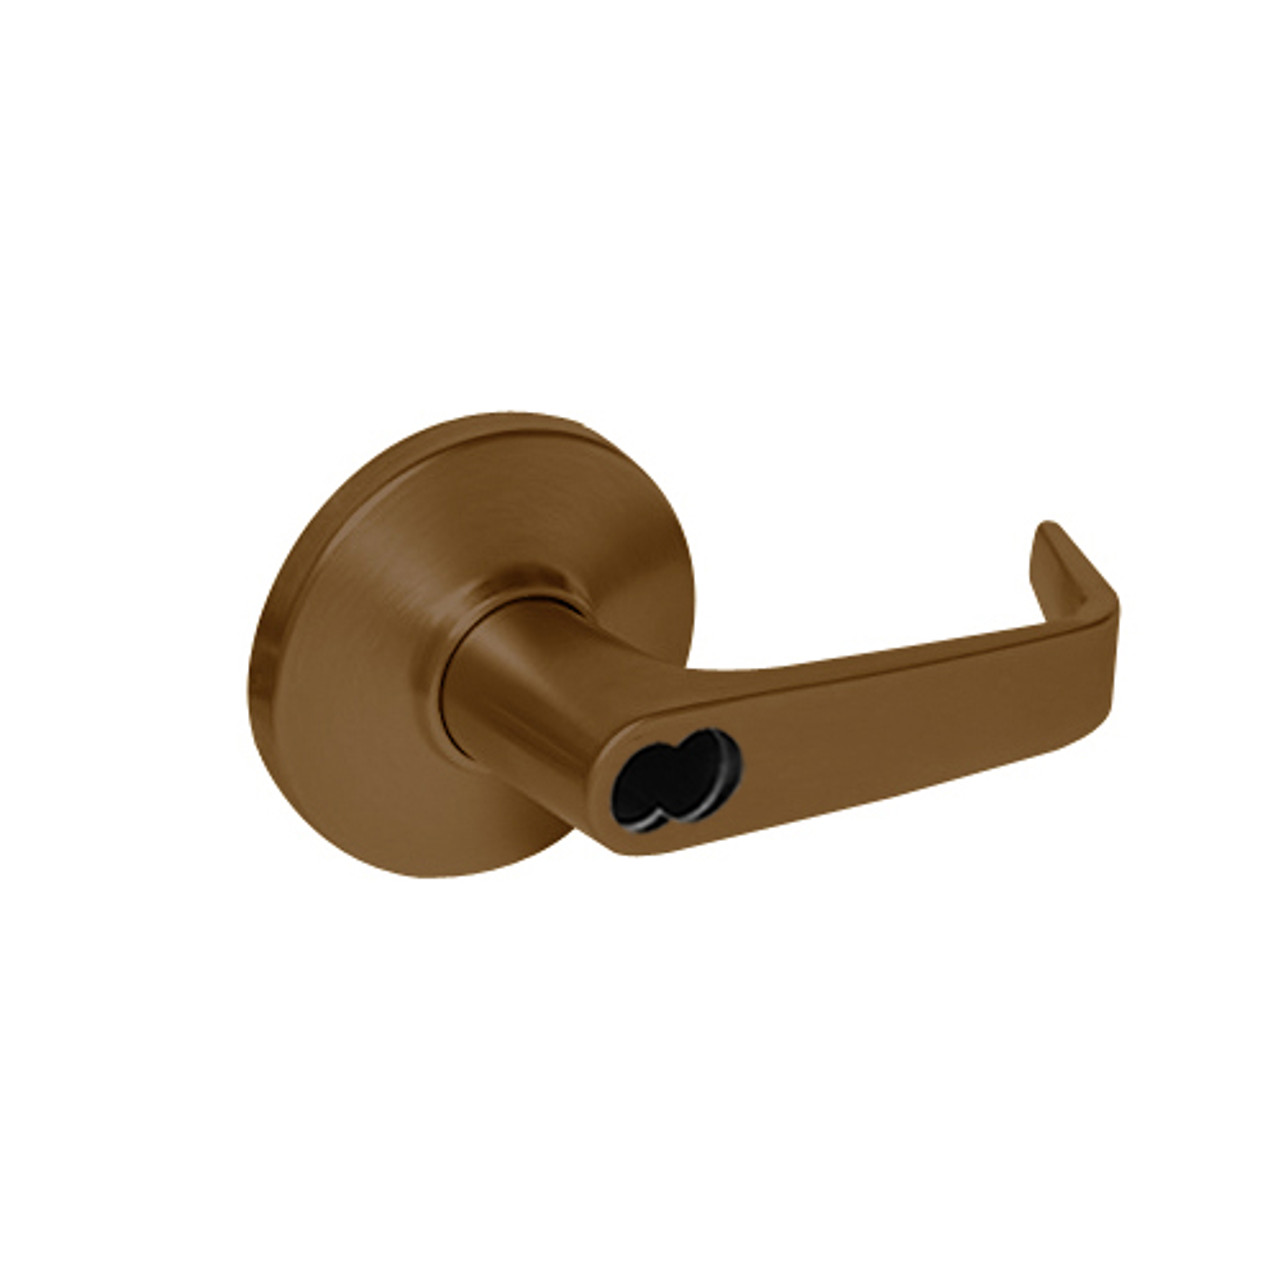 9K37RD15DSTK690 Best 9K Series Special Function Cylindrical Lever Locks with Contour Angle with Return Lever Design Accept 7 Pin Best Core in Dark Bronze